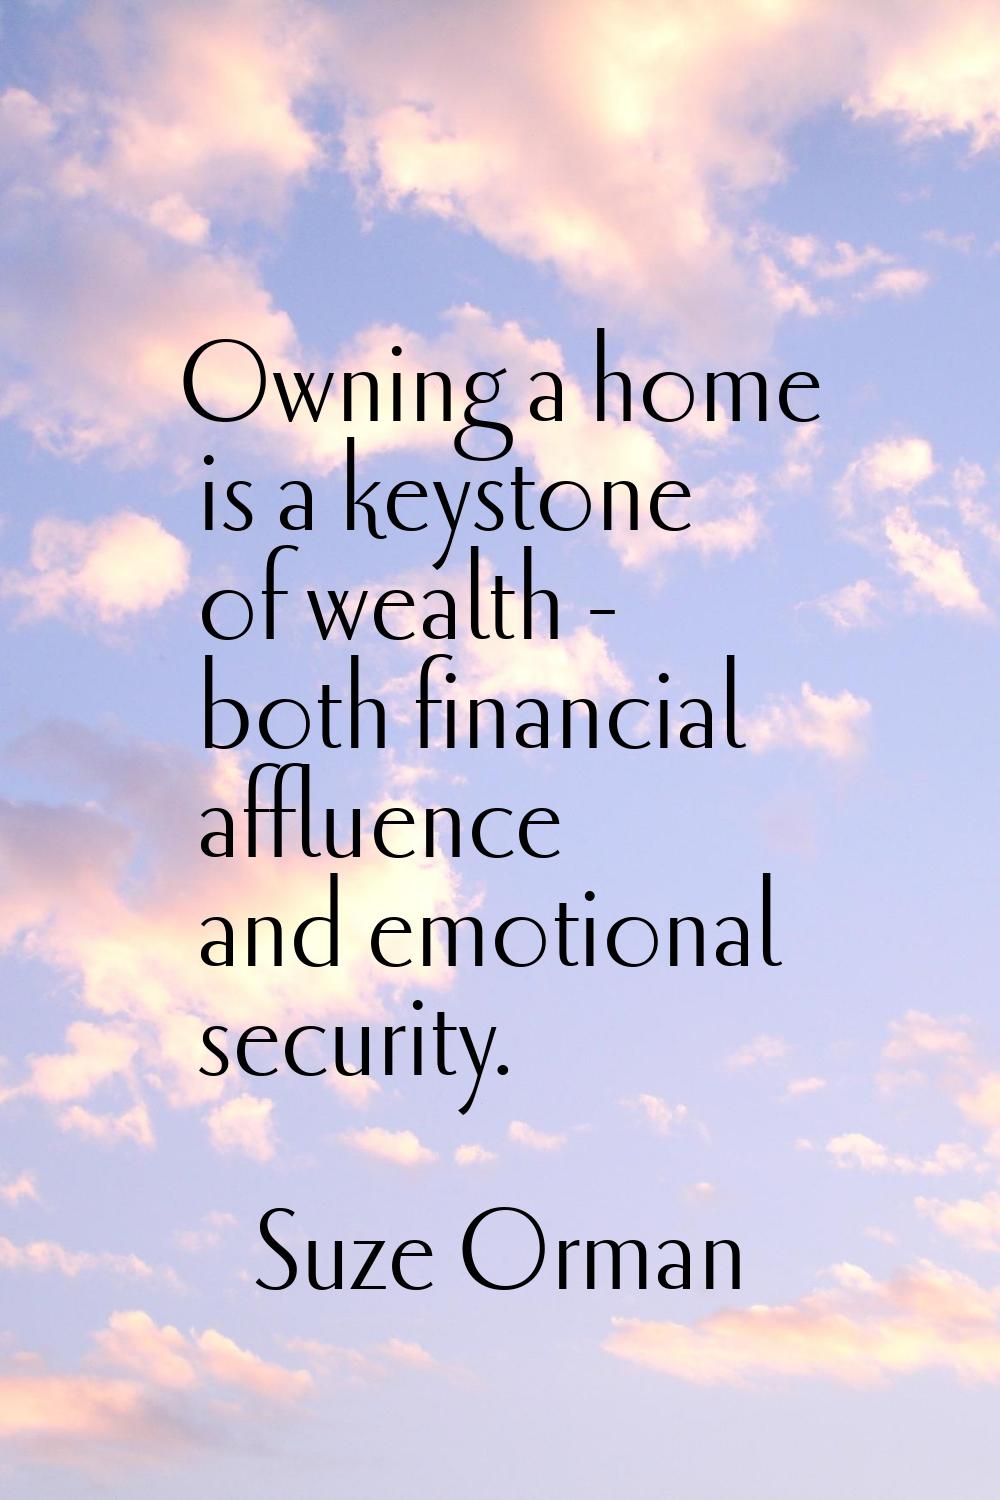 Owning a home is a keystone of wealth - both financial affluence and emotional security.